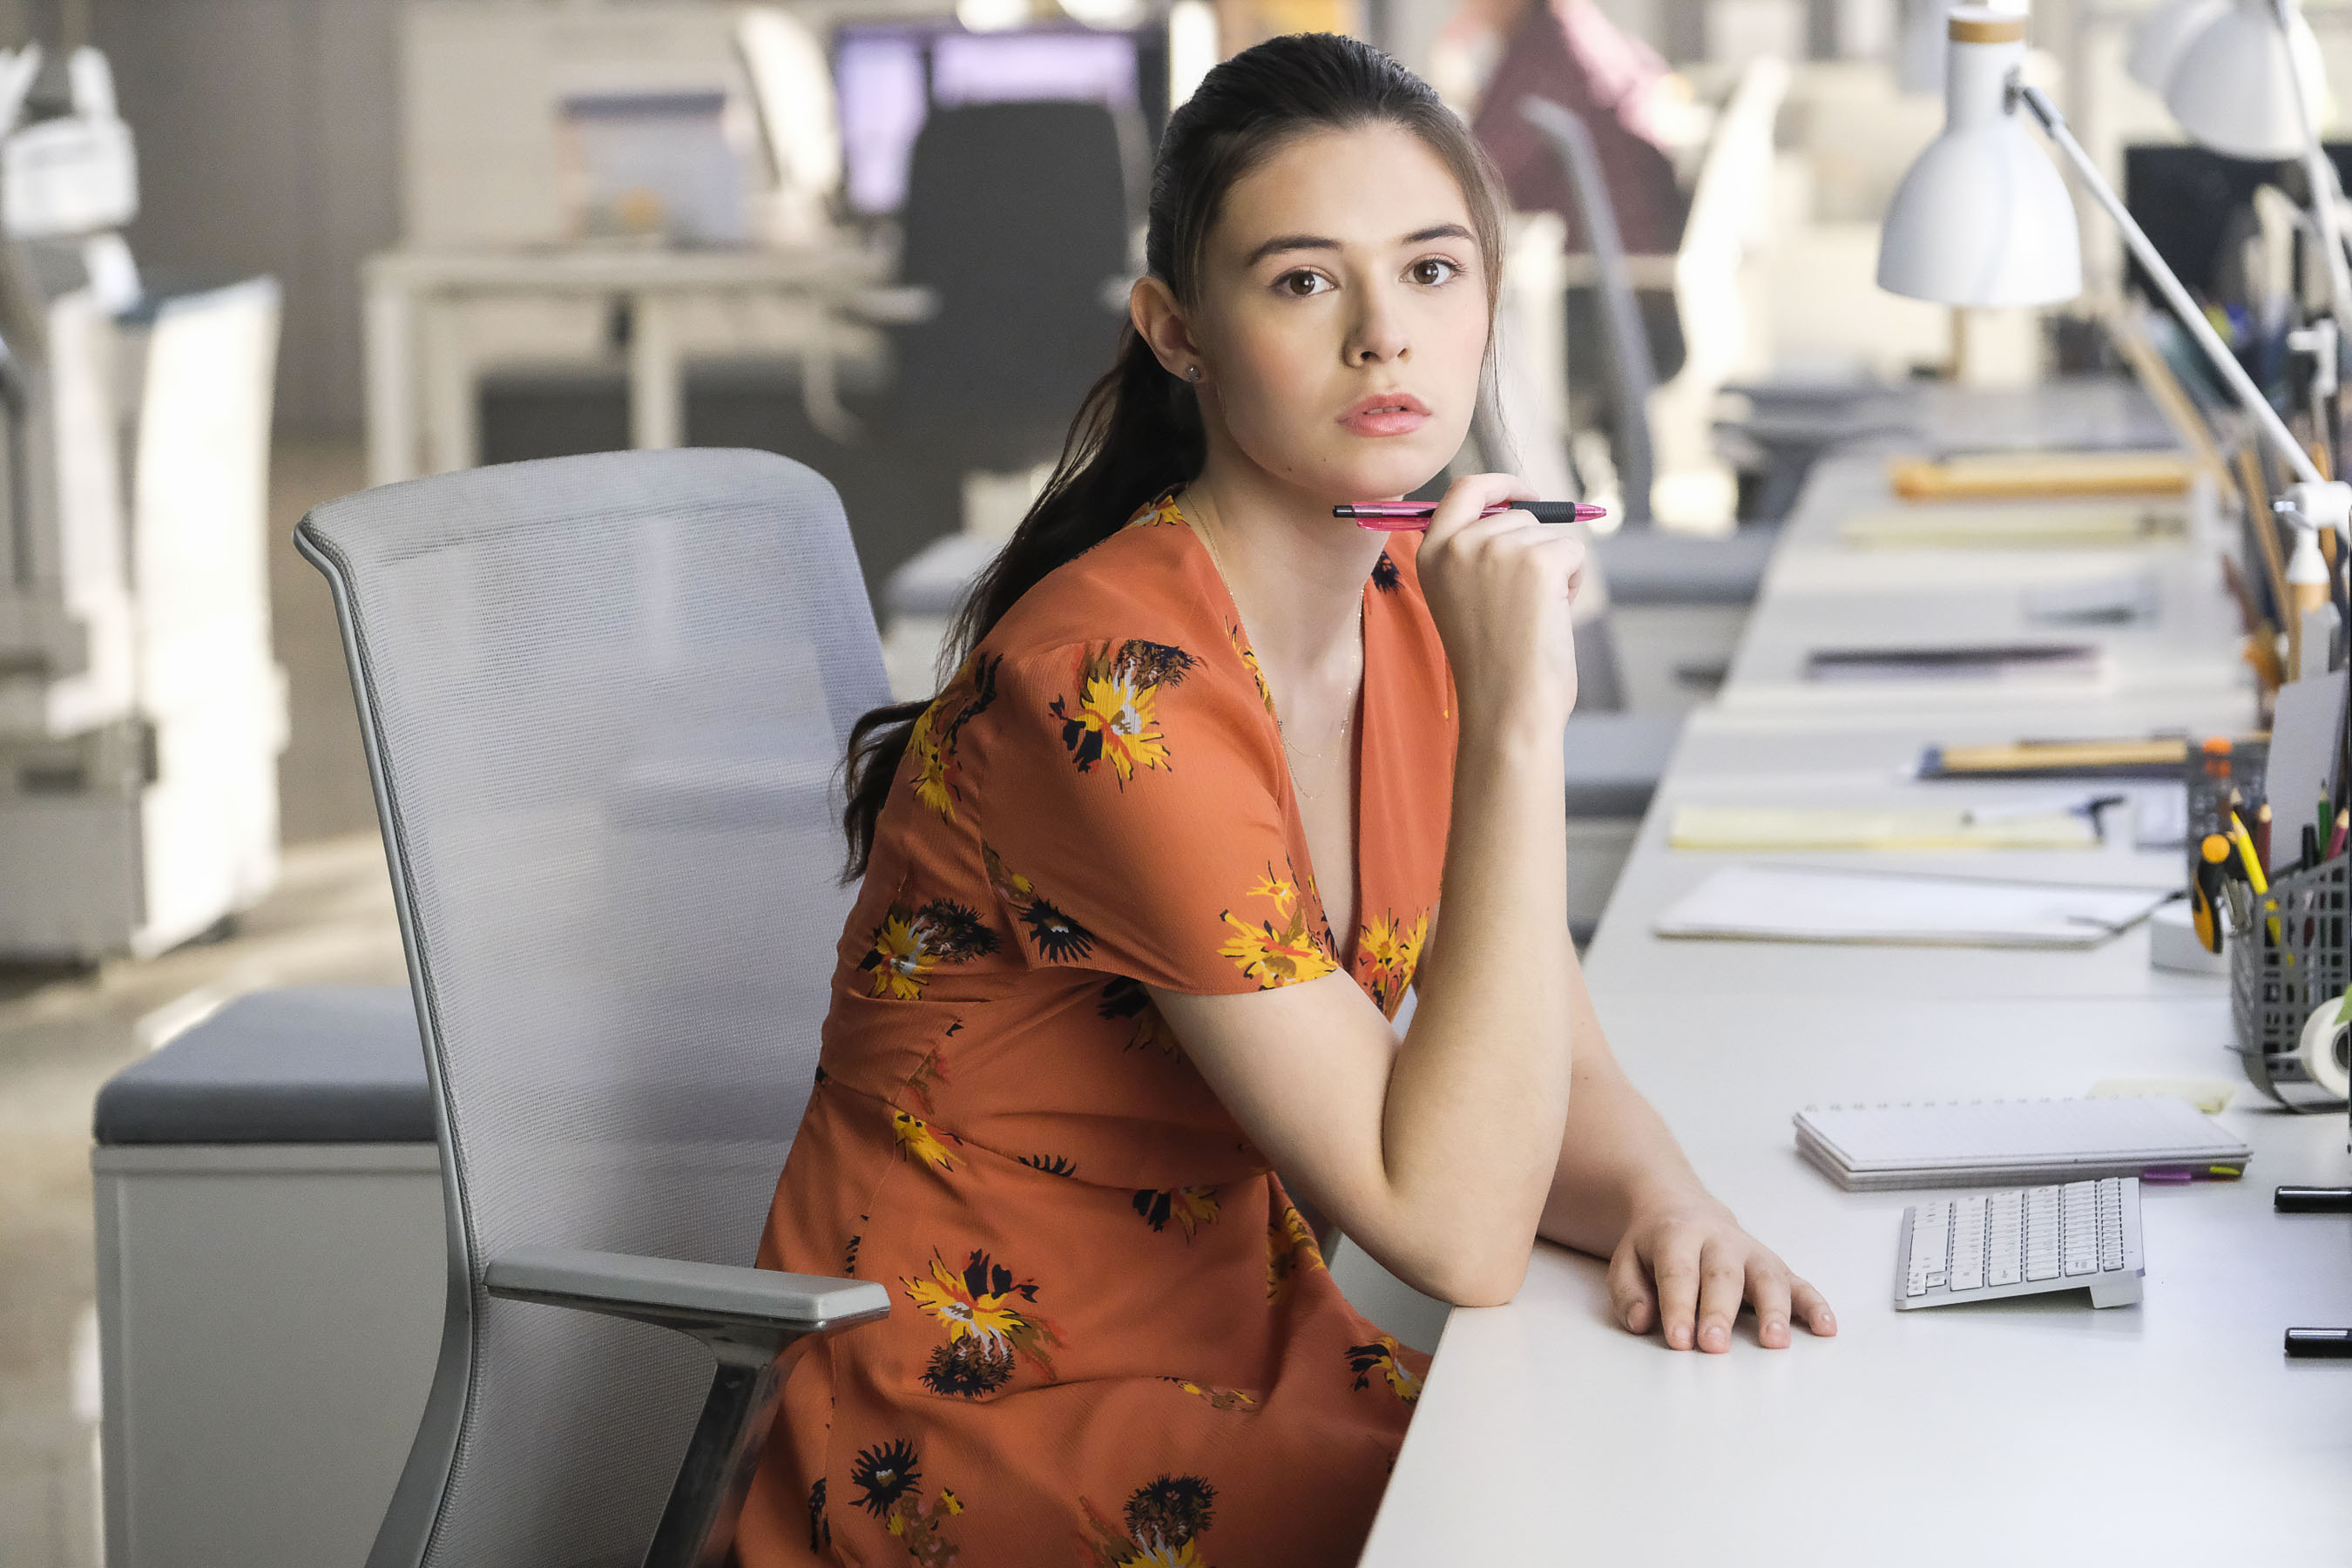 Supergirl -- "American Alien" -- Image Number: SPG401a_0470b.jpg -- Pictured: Nicole Maines as Nia Nal -- Photo: Bettina Strauss/The CW -- ÃÂ© 2018 The CW Network, LLC. All Rights Reserved.